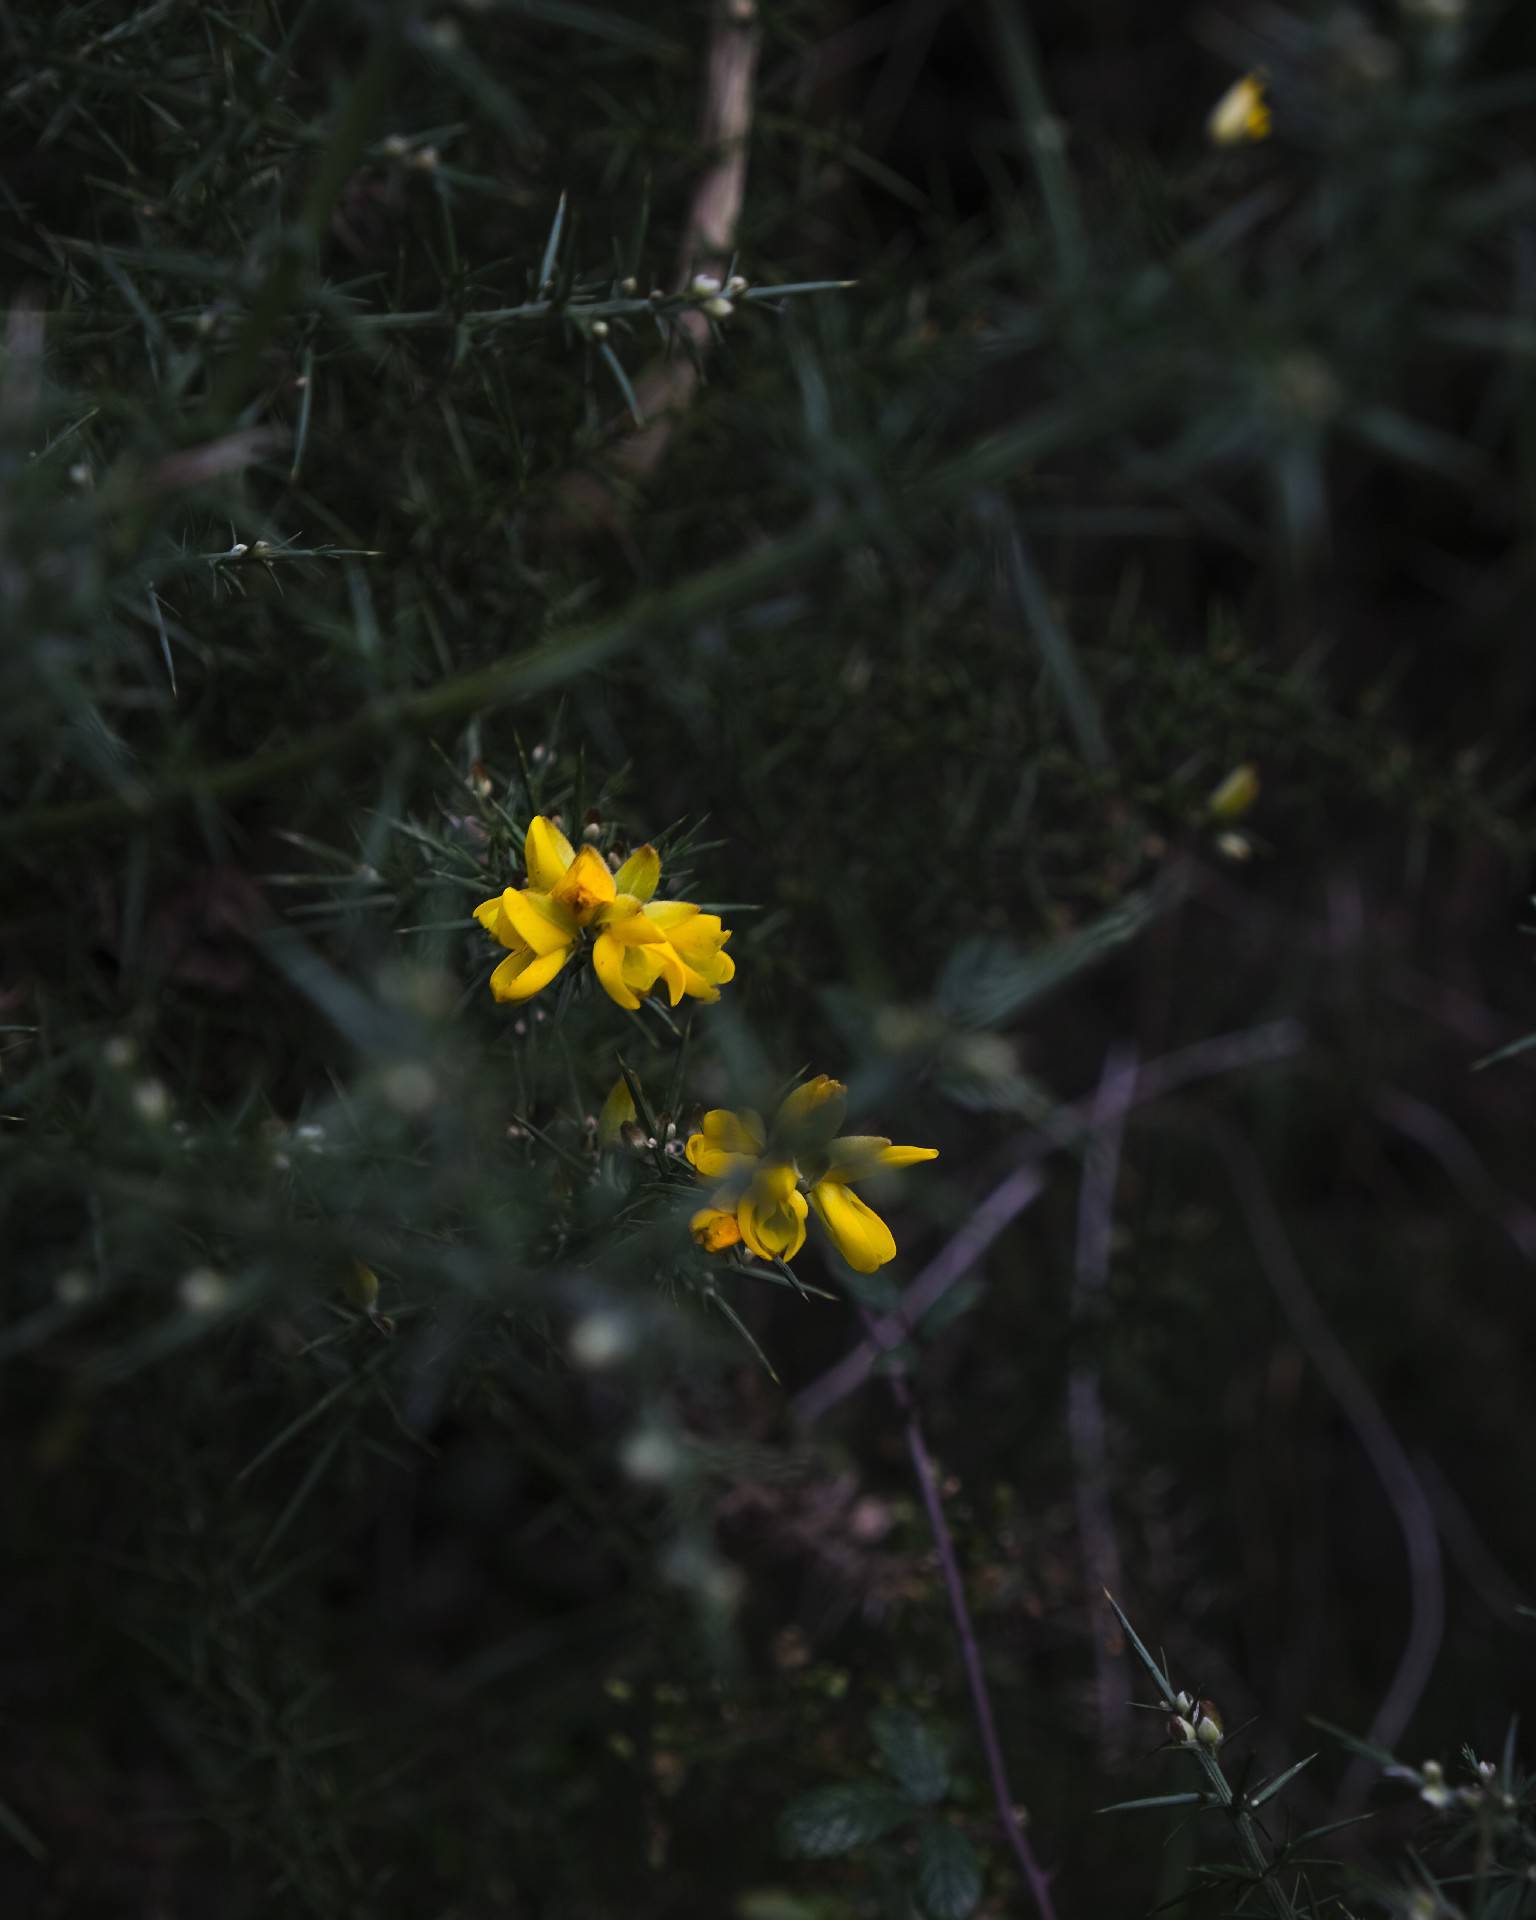 A yellow flower surrounded by dark green leaves.